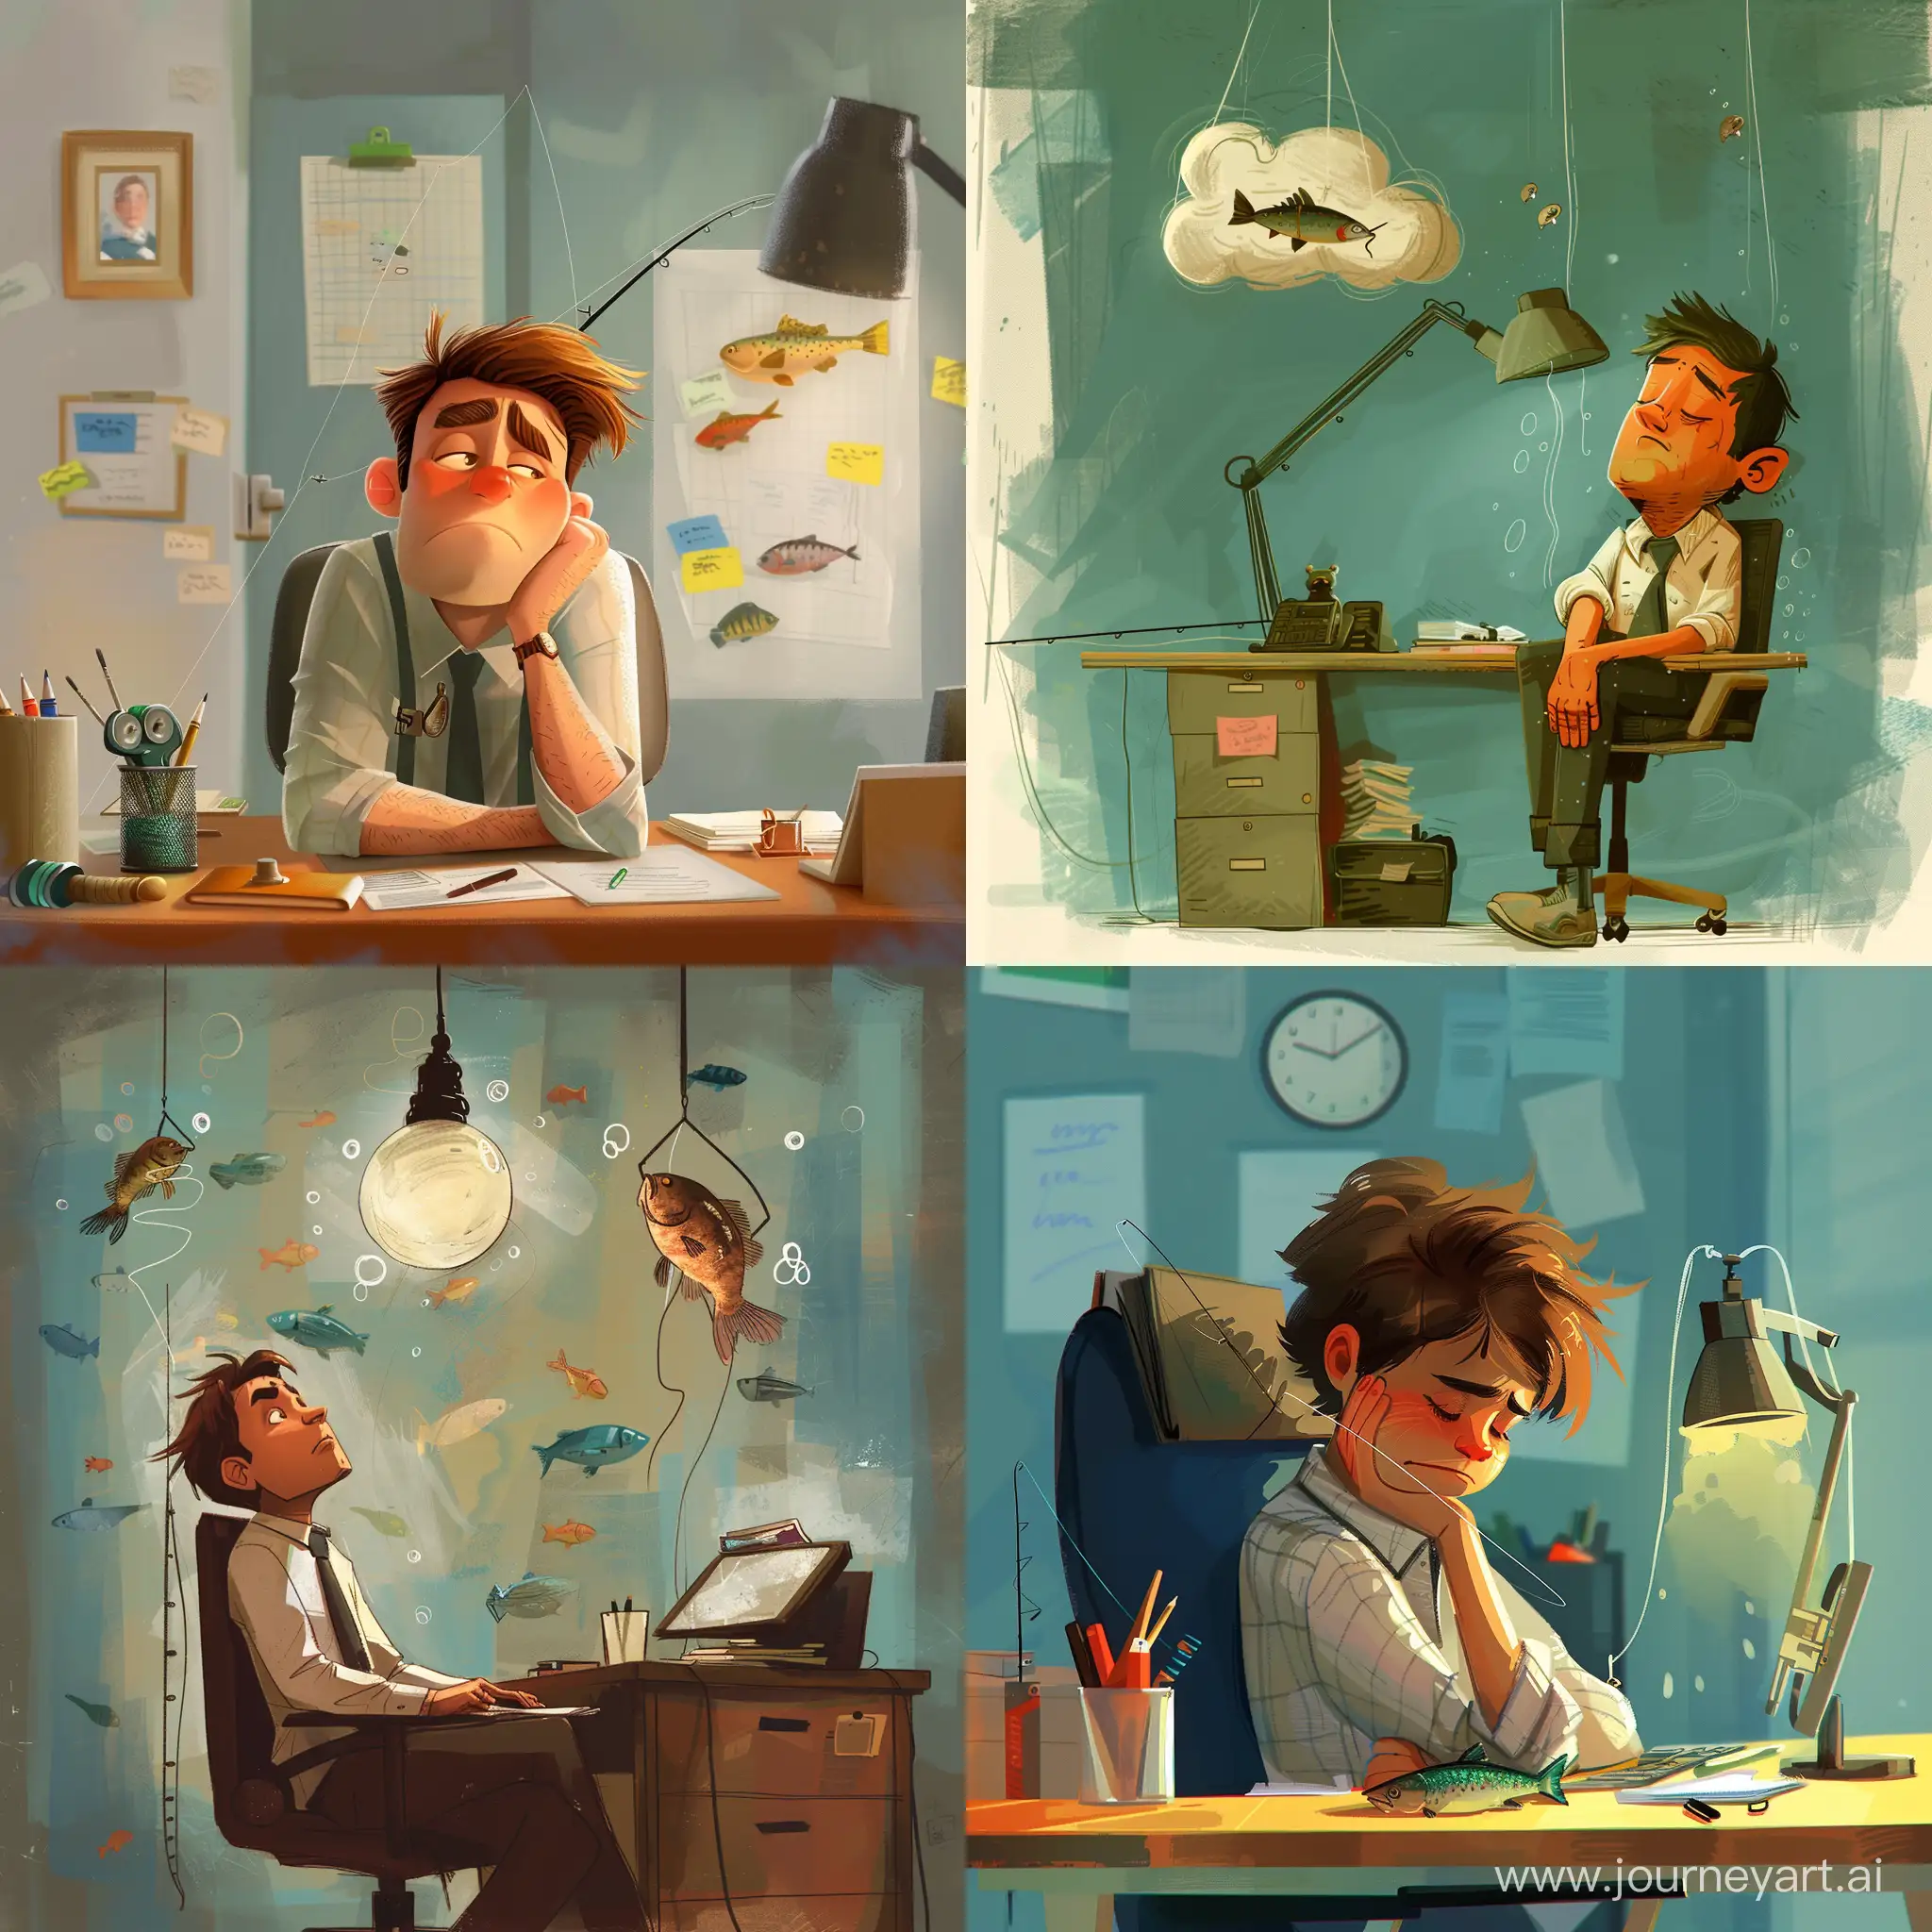 Draw an office worker who is tired and dreams of going fishing. Make it in pixar style.